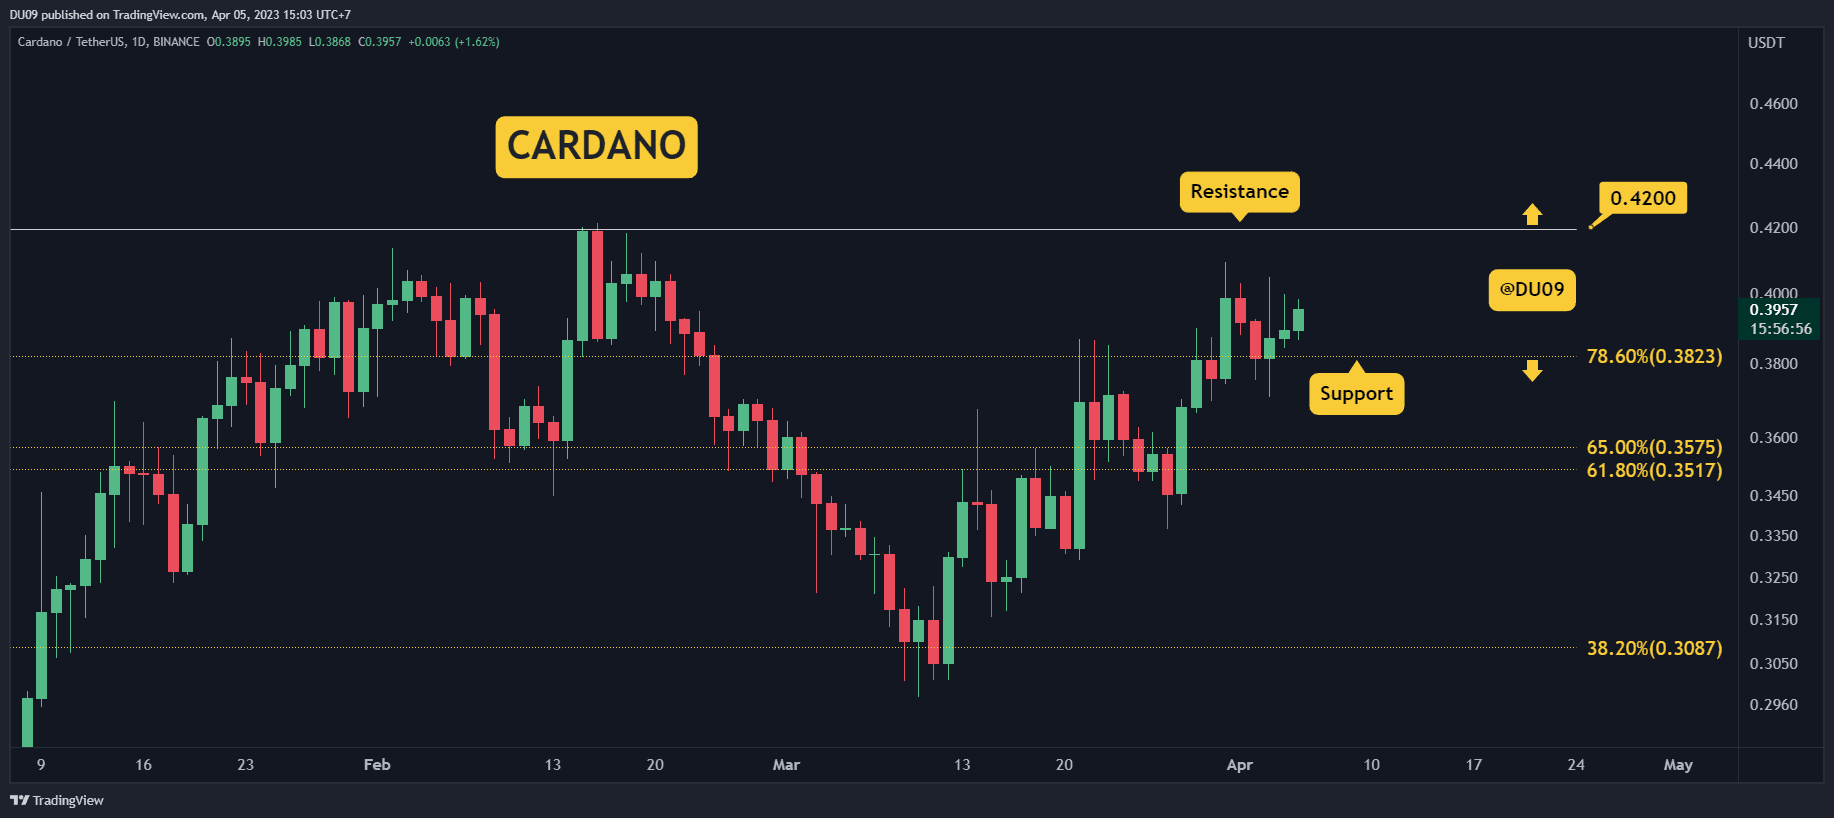 Here’s-the-next-resistance-if-ada-breaks-above-$0.40-(cardano-price-analysis)